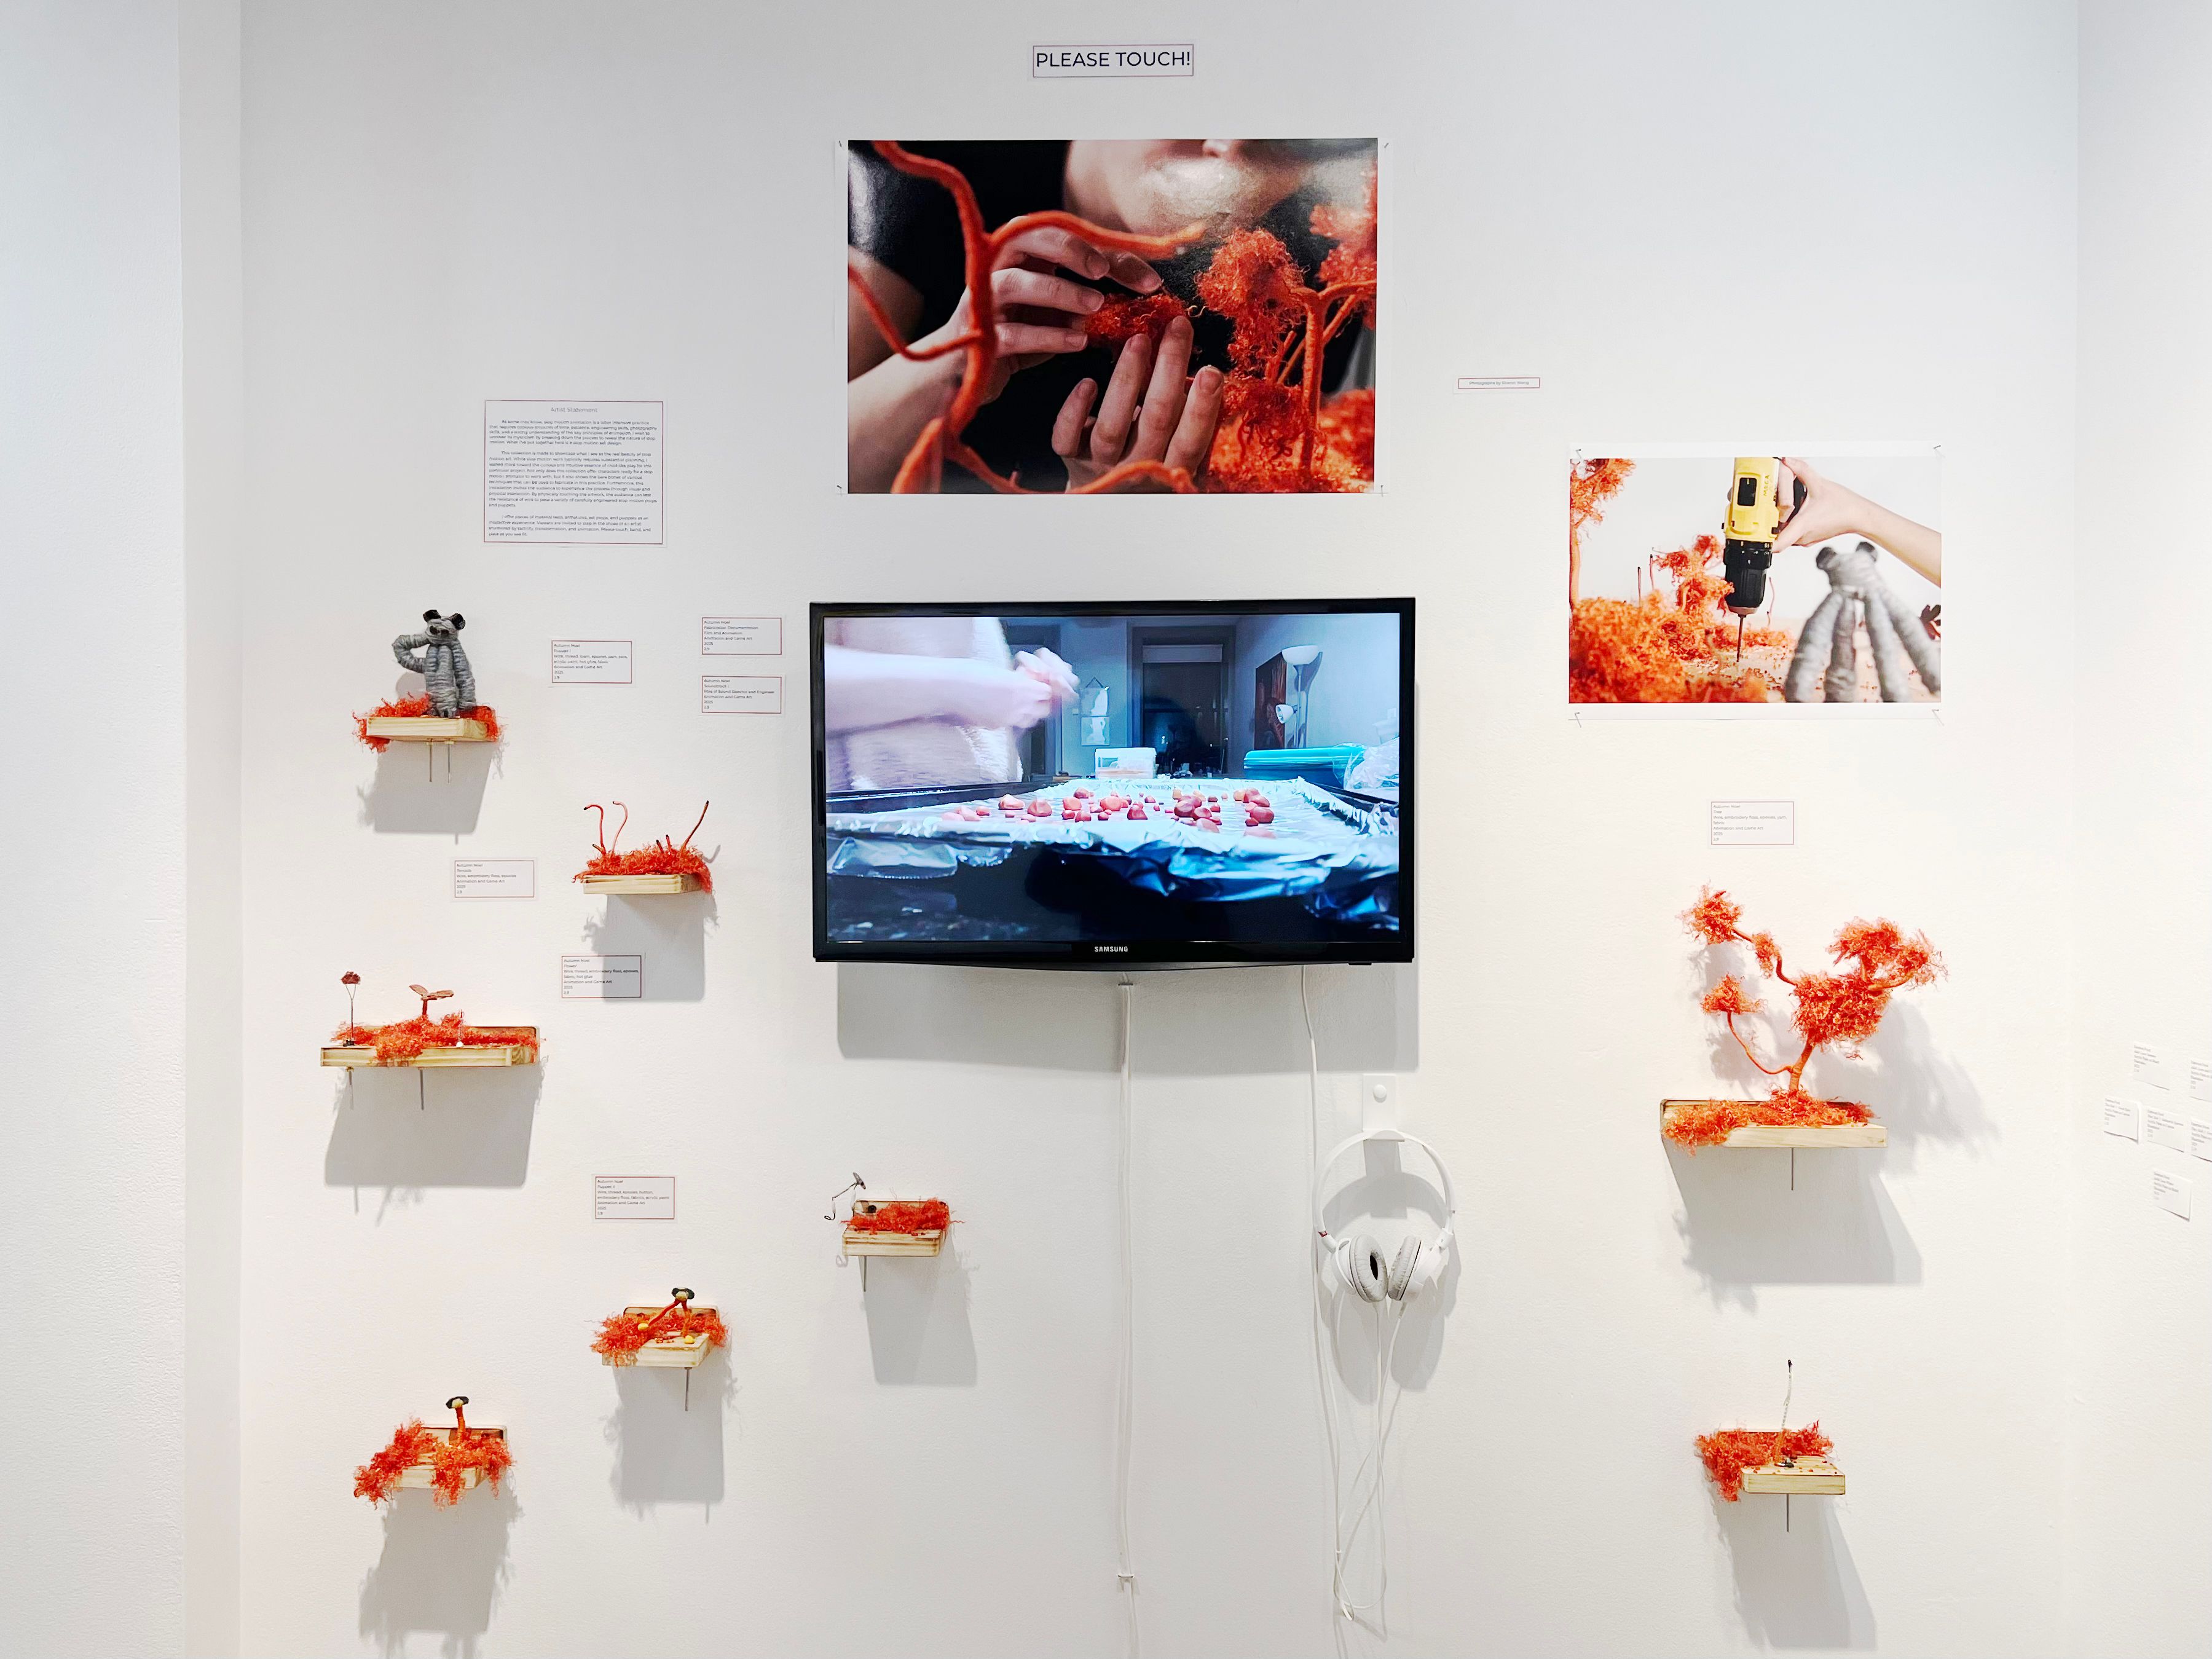 An installation of a stop-motion animation with orange models.